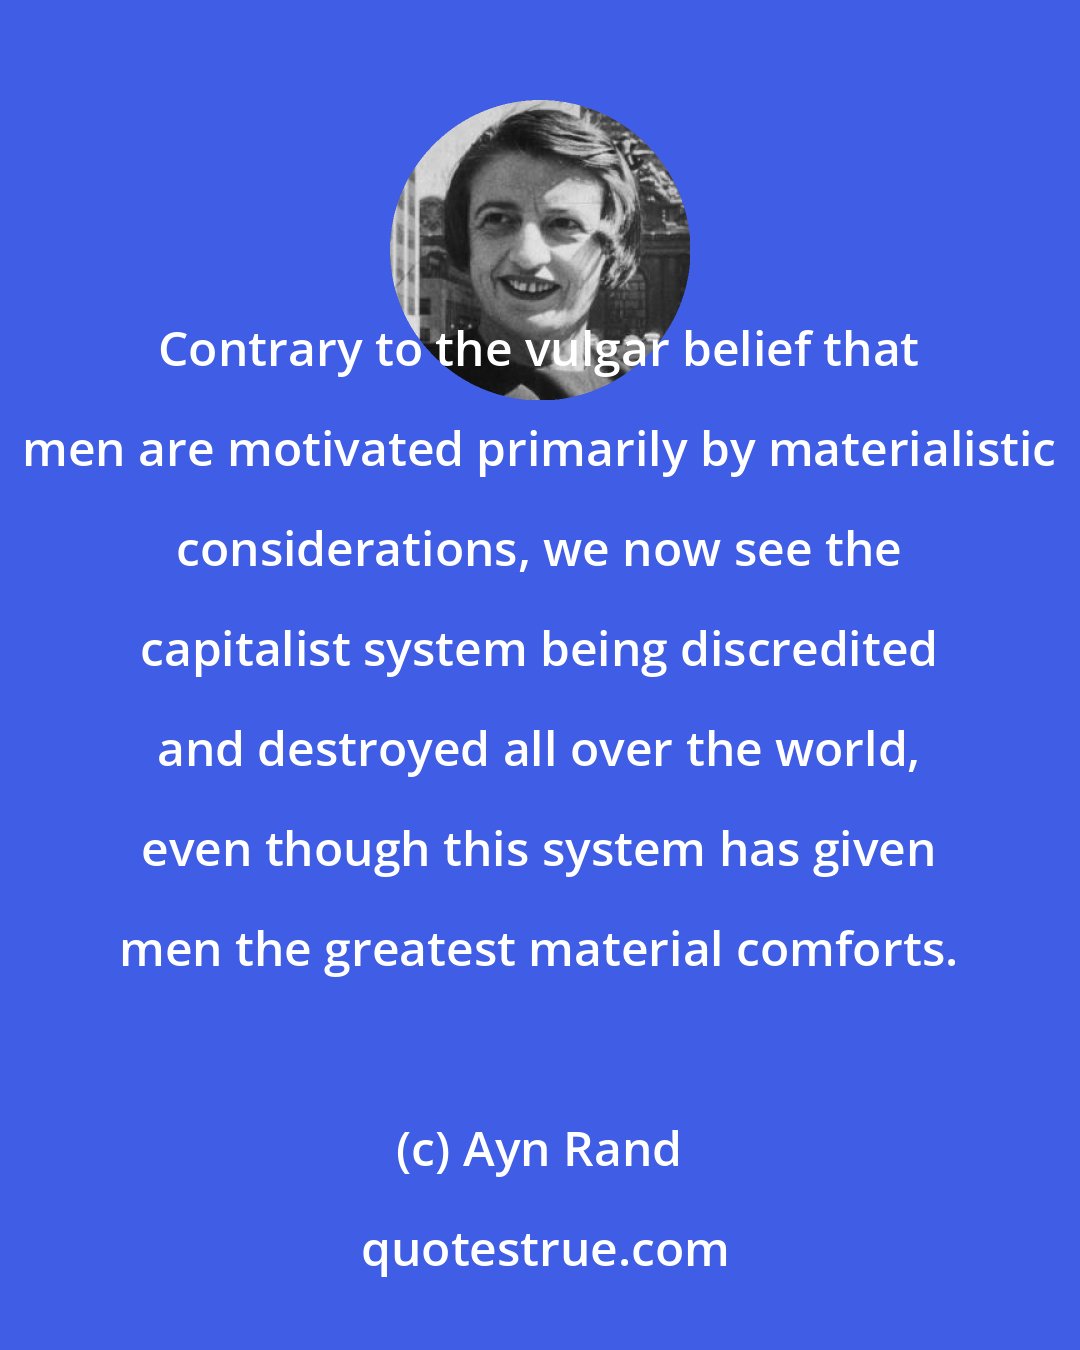 Ayn Rand: Contrary to the vulgar belief that men are motivated primarily by materialistic considerations, we now see the capitalist system being discredited and destroyed all over the world, even though this system has given men the greatest material comforts.